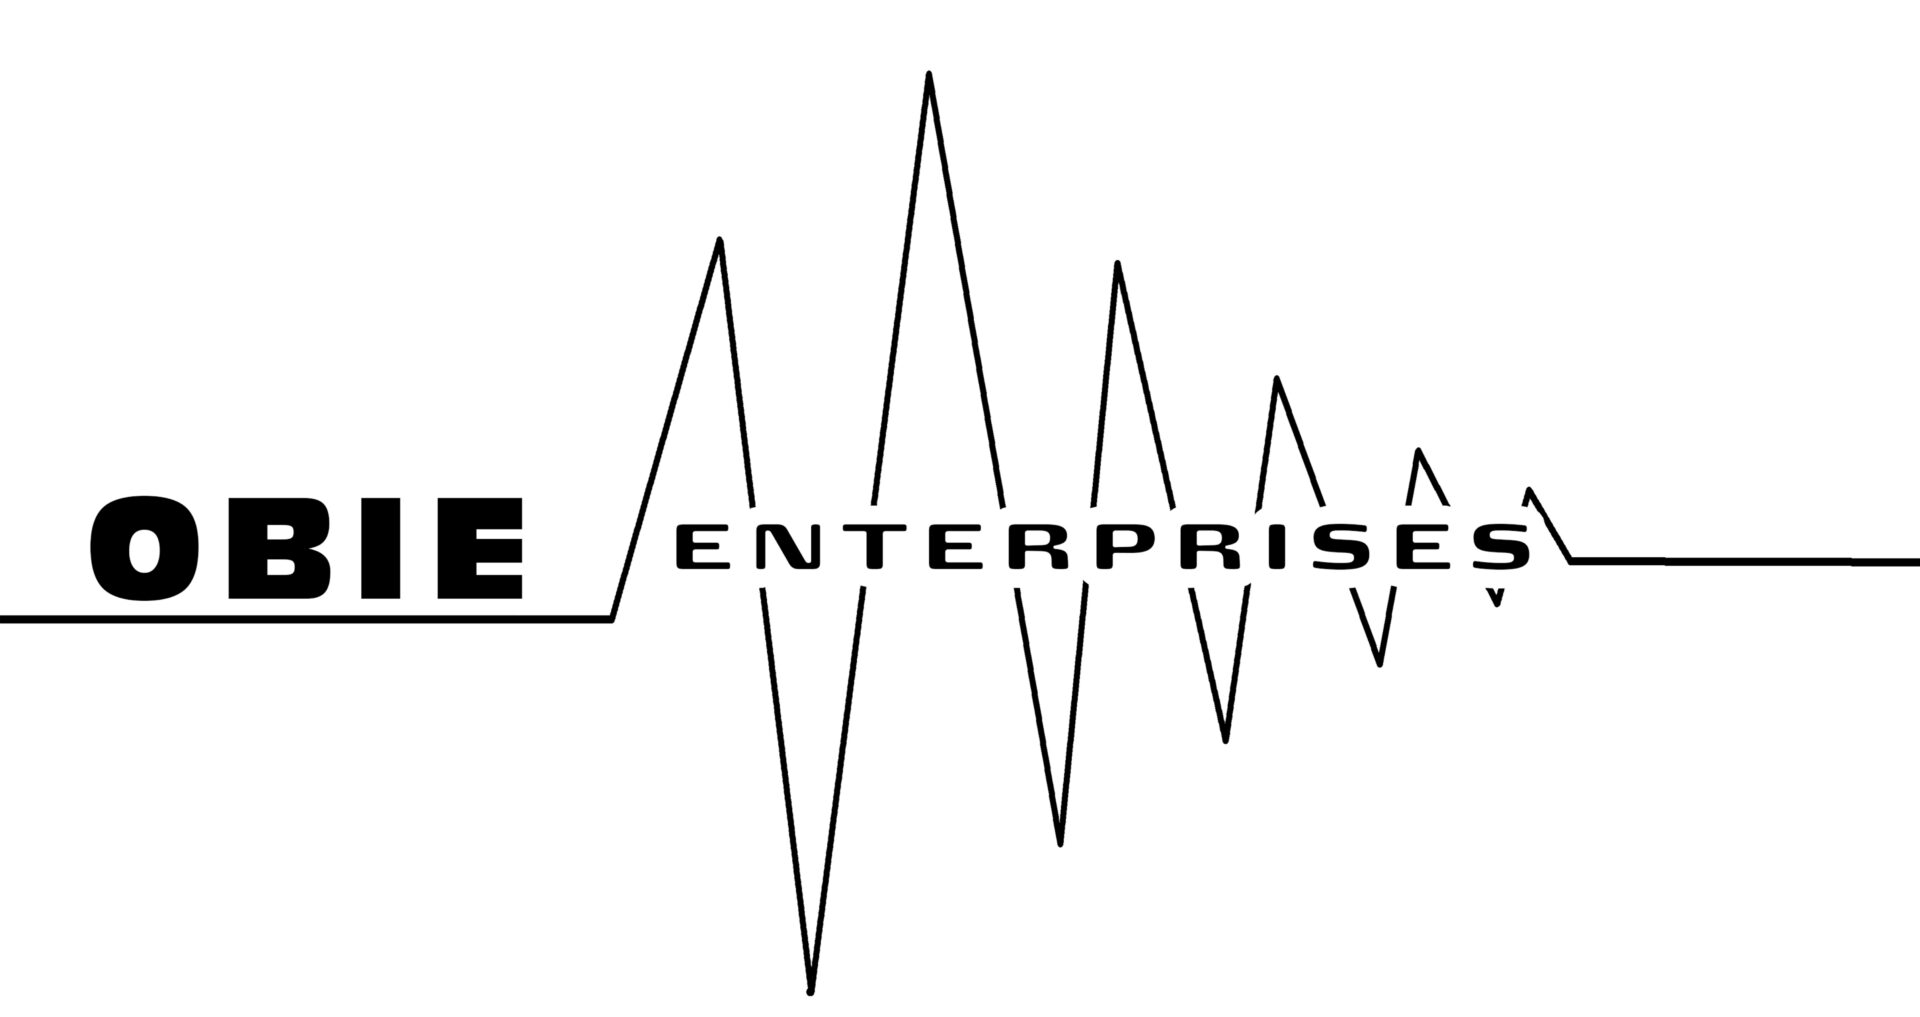 A black and white image of the logo for enterprise.